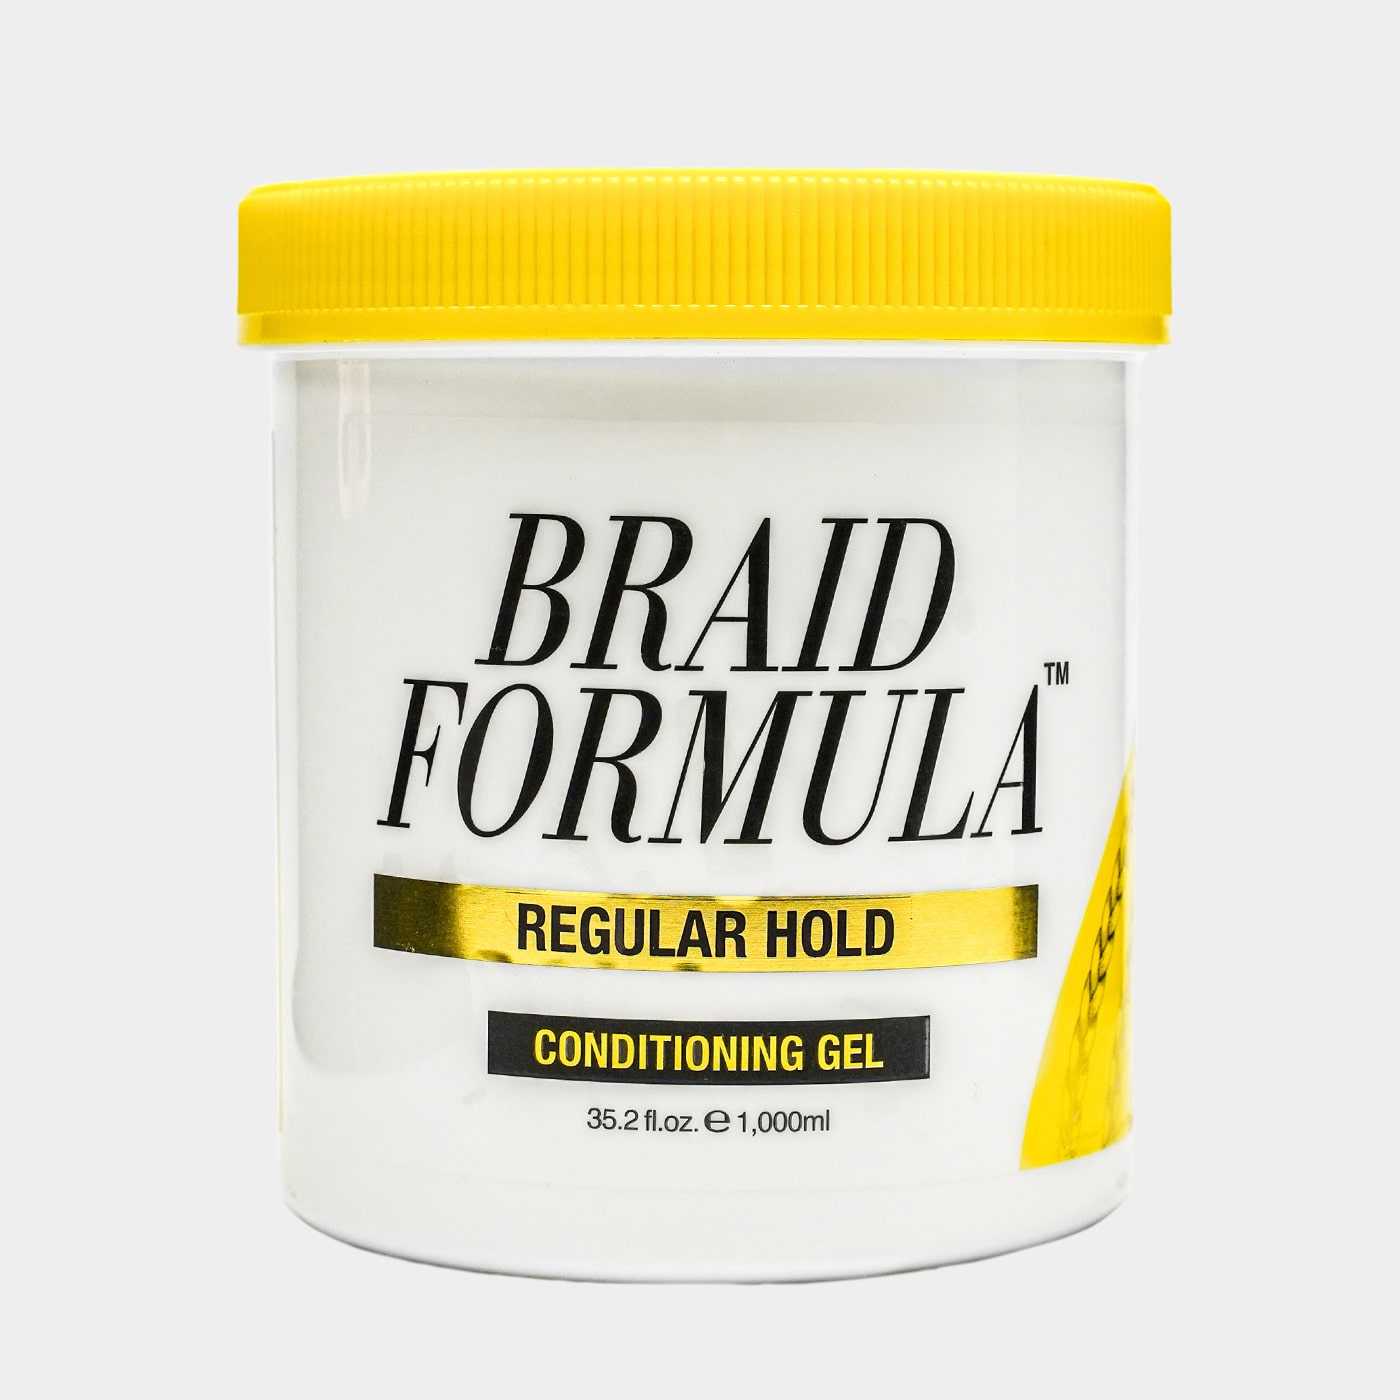  The MORE Crazy Conditioning Shining Braiding Gel